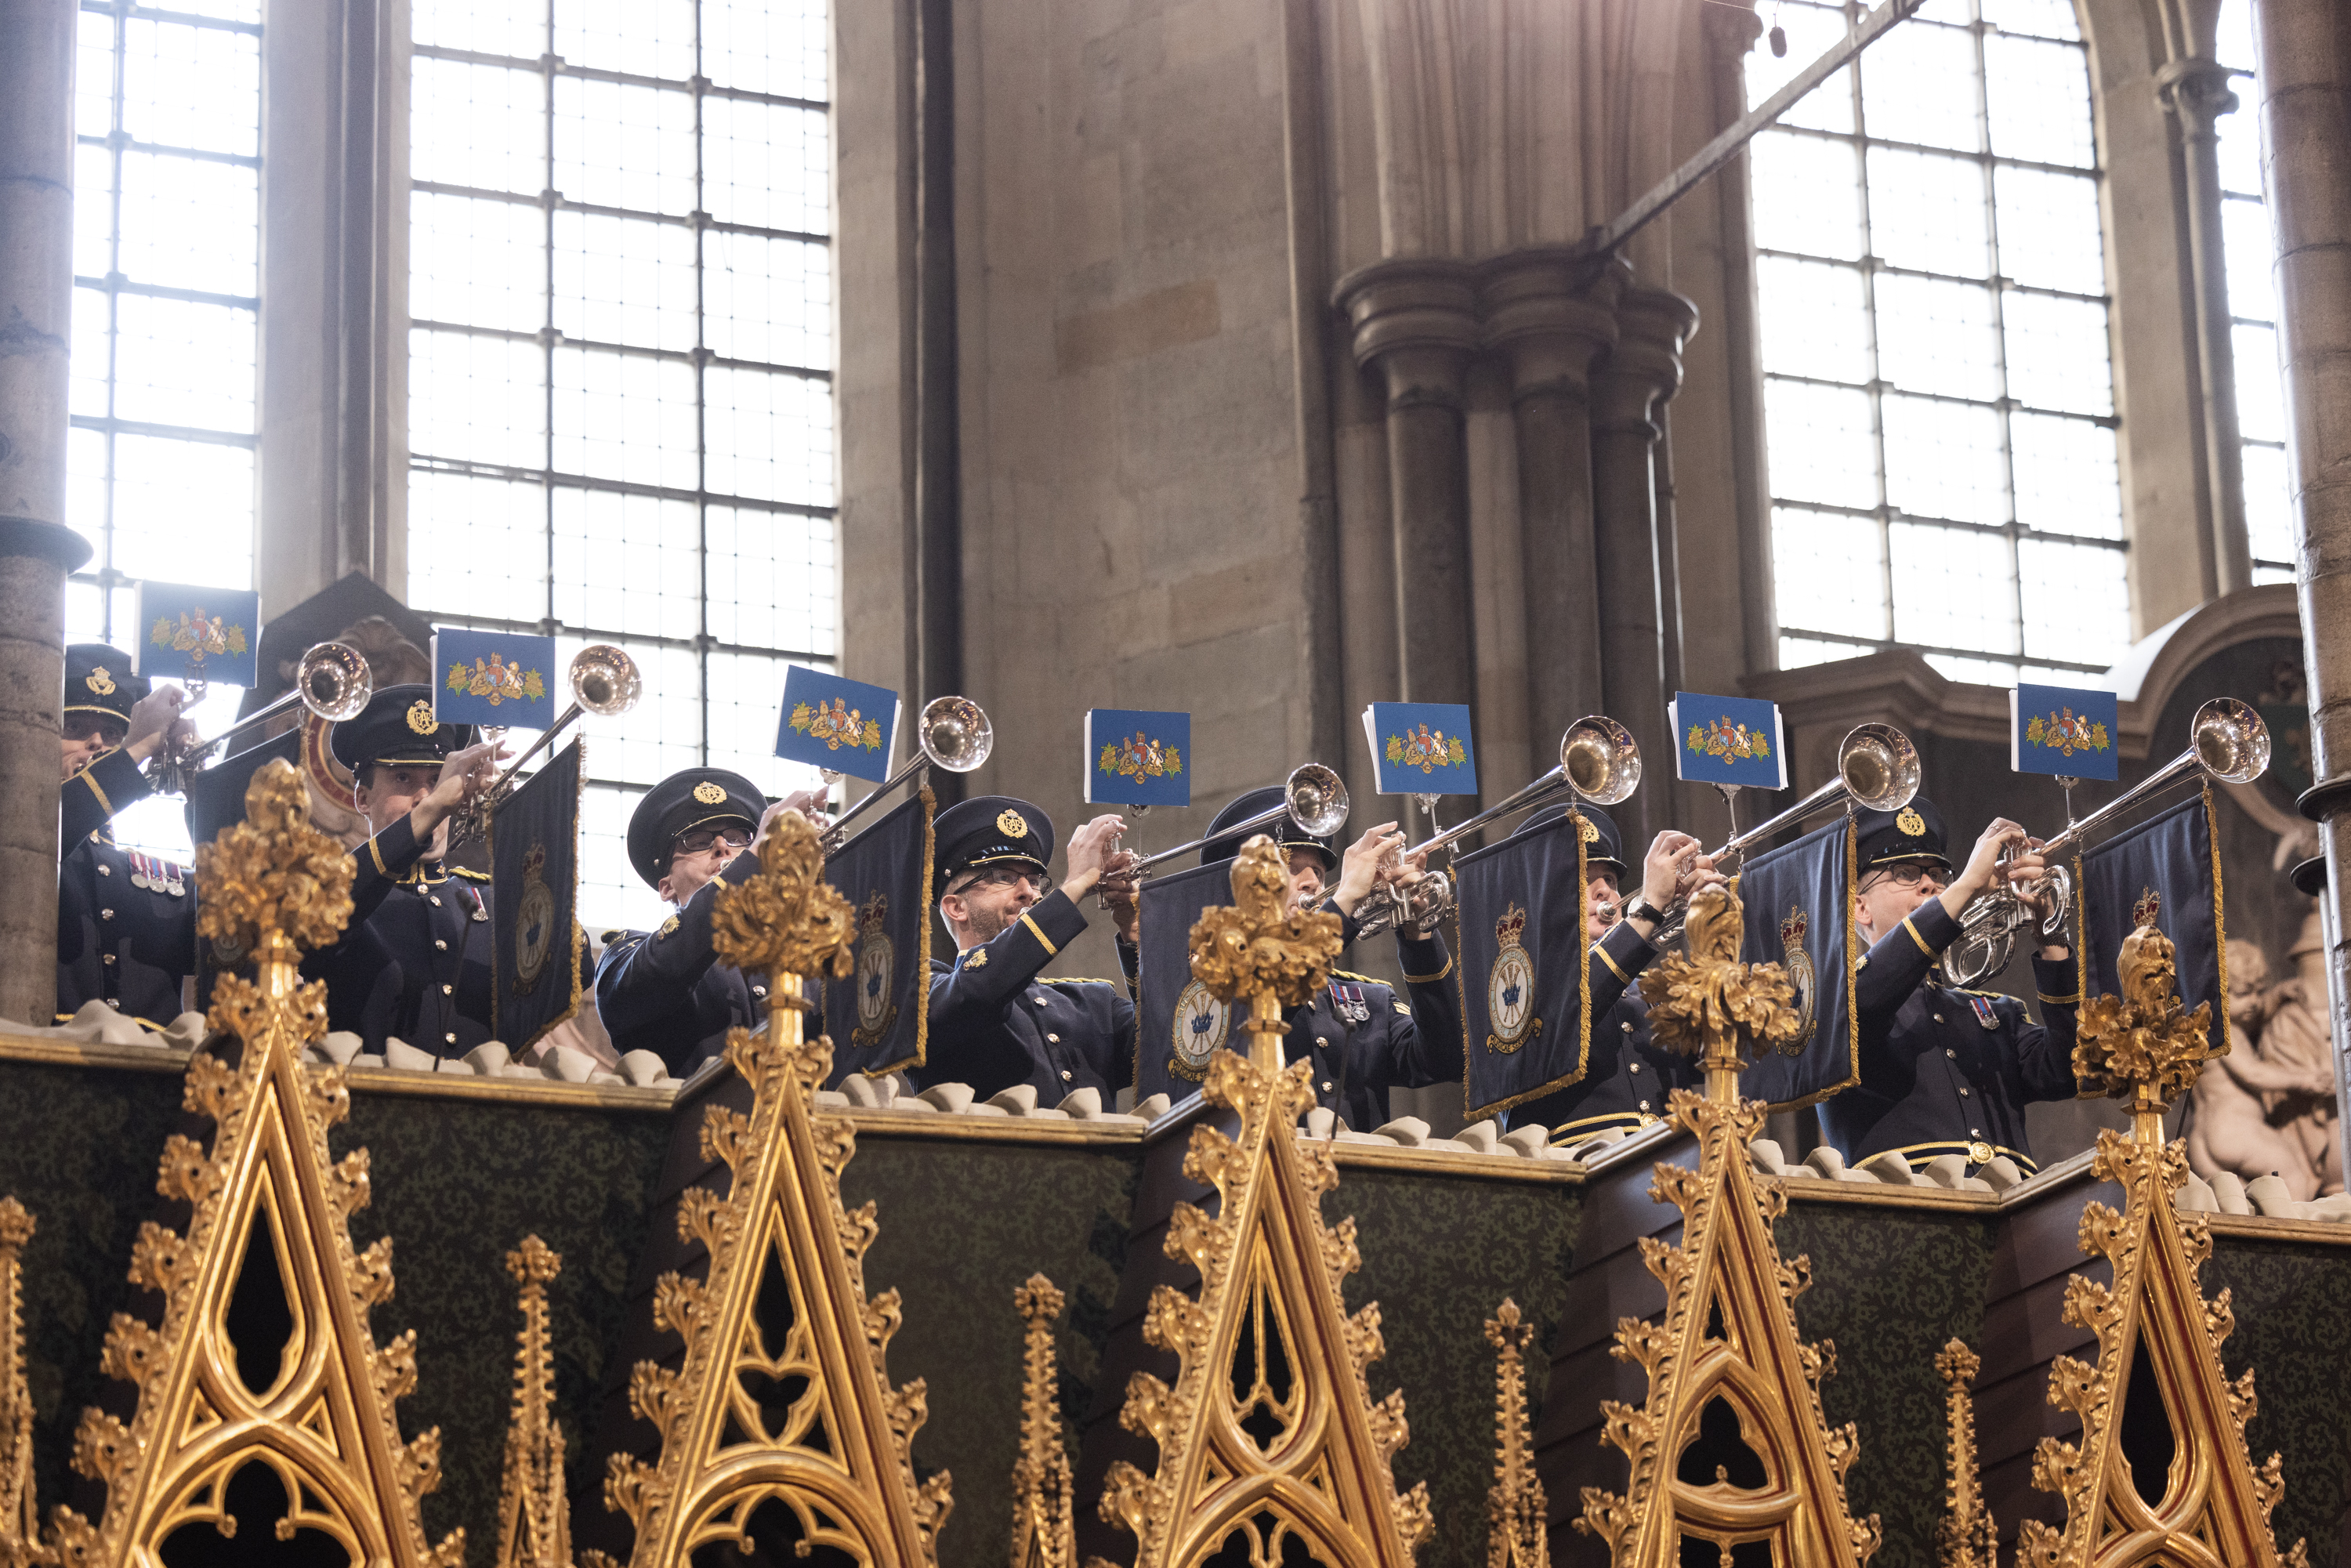 The Fanfare Trumpeters of the RAF perform at Westminster Abbey for The Coronation of King Charles III and Queen Camilla